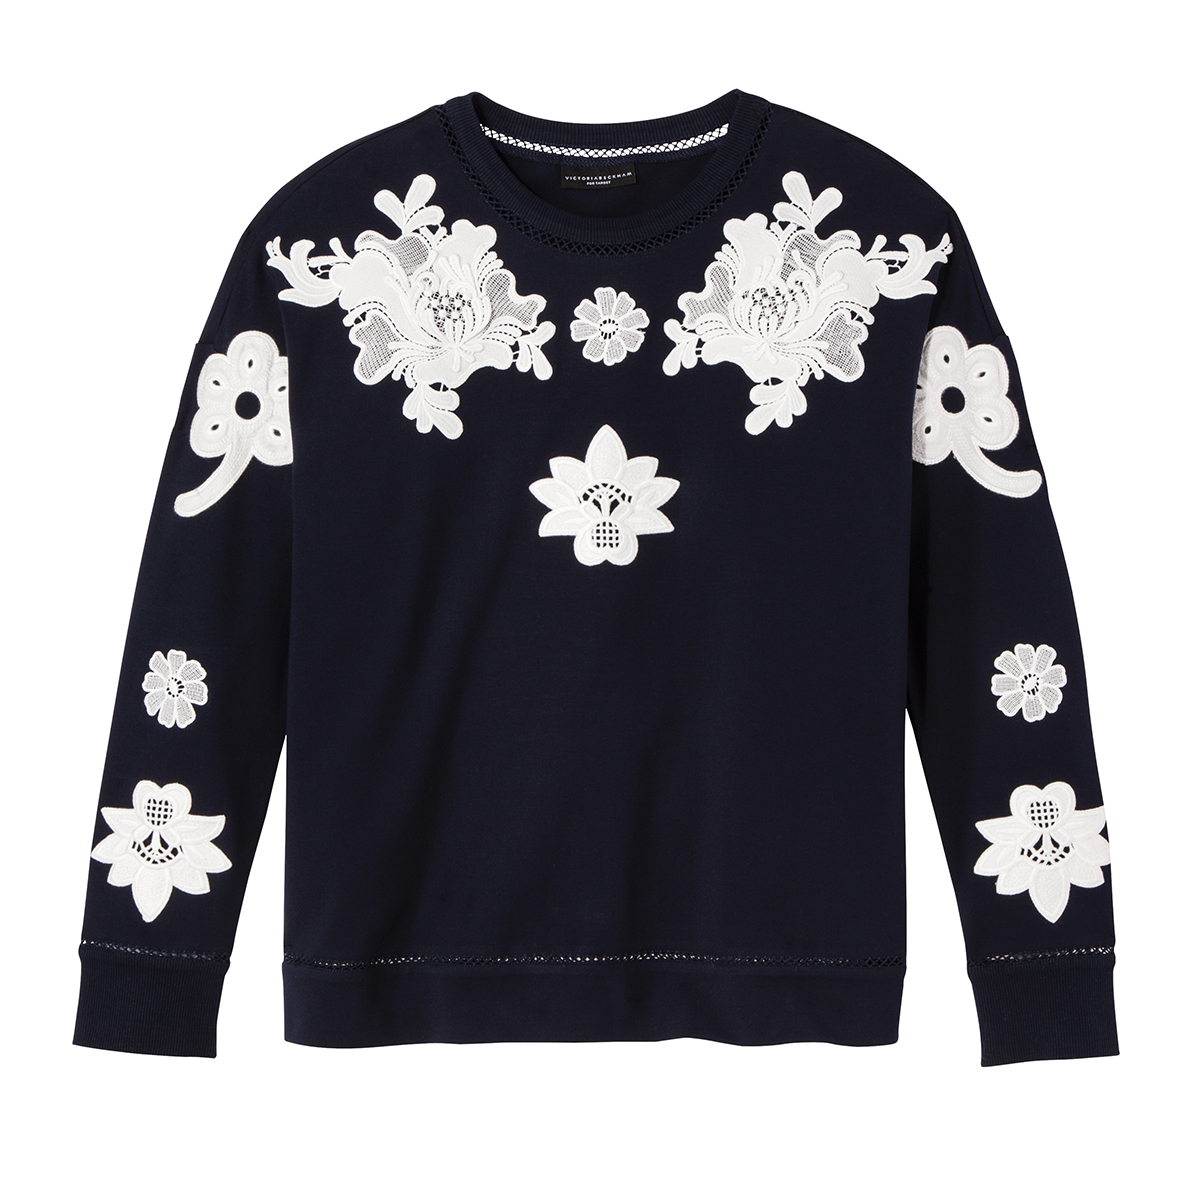 Navy and White Floral Lace Appliqué Top, $30